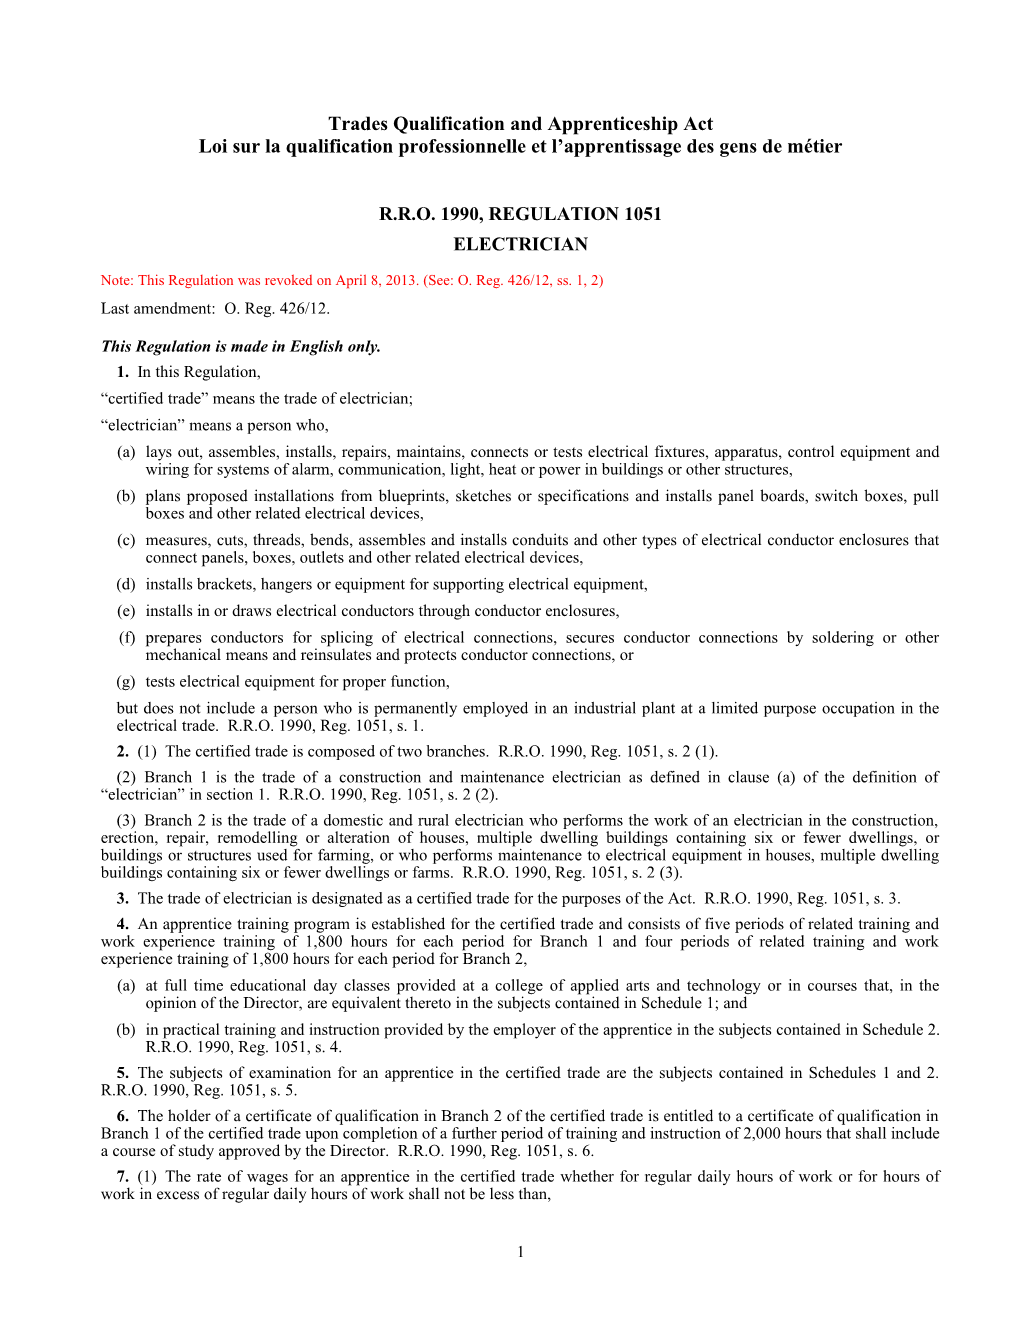 Trades Qualification and Apprenticeship Act - R.R.O. 1990, Reg. 1051